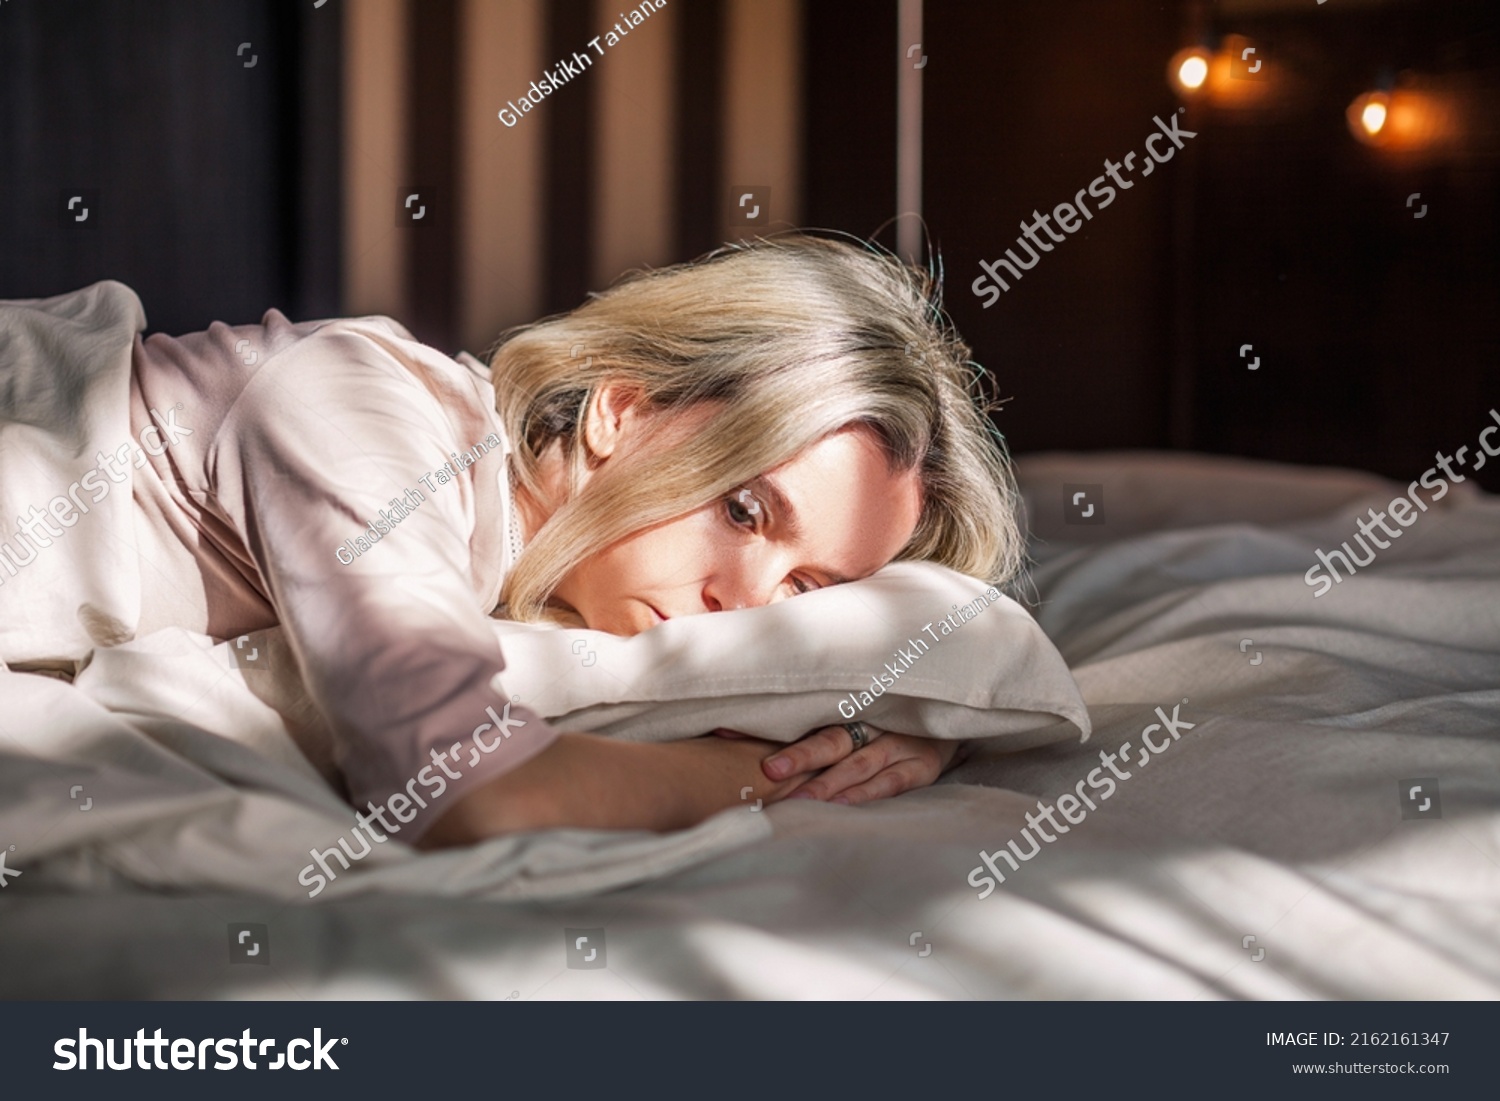 Tired middle aged woman lying in bed can't sleep late at morning with insomnia. Adult lady sick or sad depressed sleeping at home.
 #2162161347